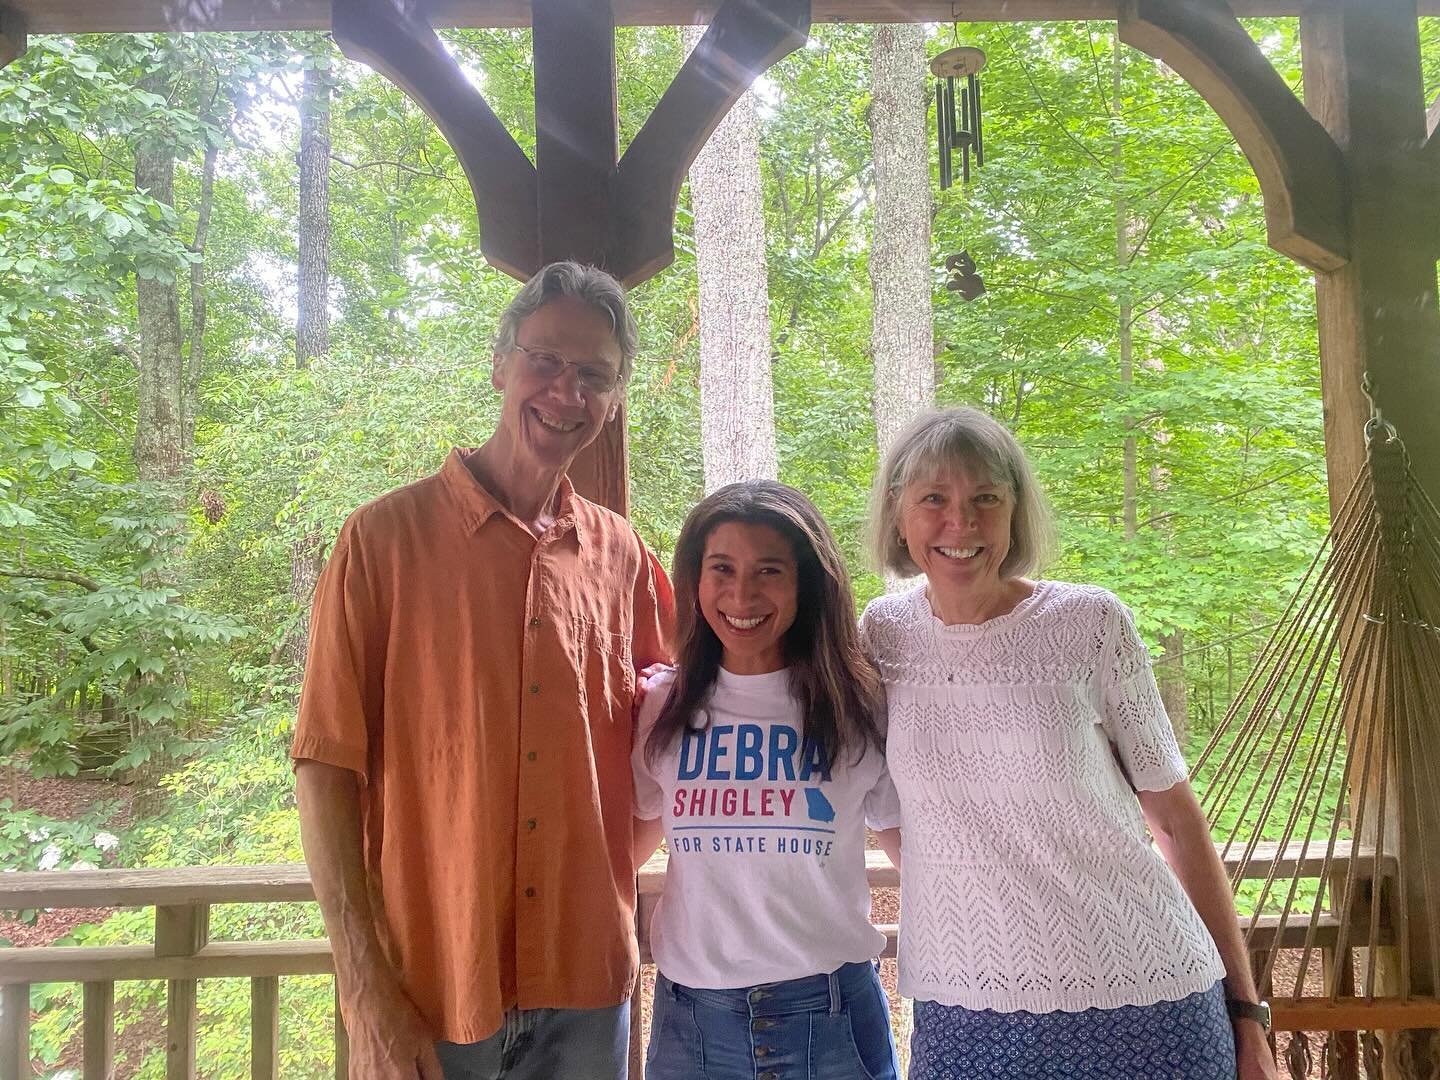 Thank you so much to Helen and John hosting a wonderful meet &amp; greet / canvassing launch in Mountain Park today. 

It was a pleasure to get to know more neighbors in this beautiful community in District 47&ndash; and get a tour of the Lake! 

#mo